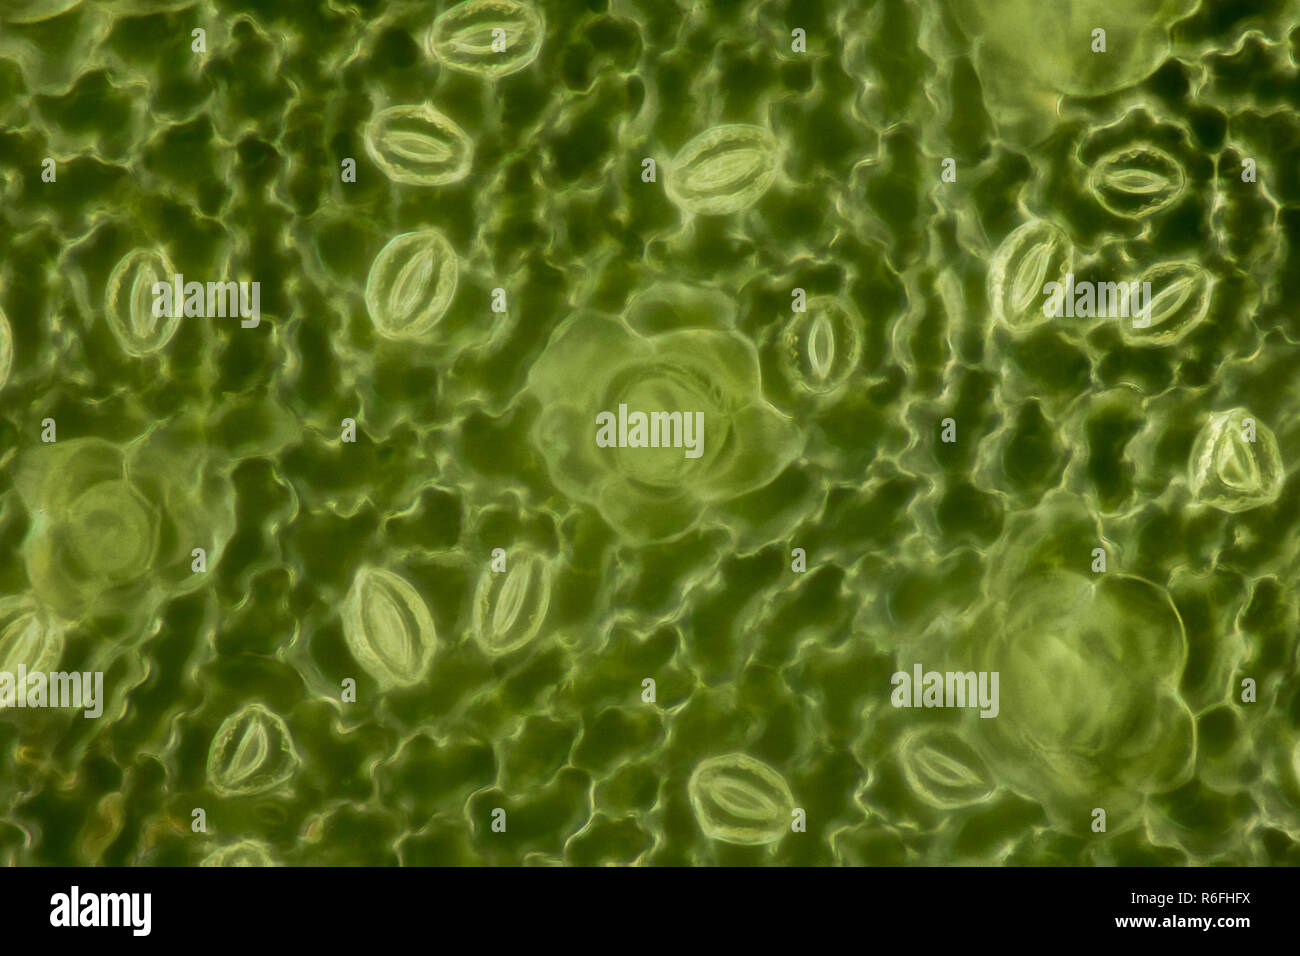 Extrem magnification - Stomatas in a green leaf Stock Photo